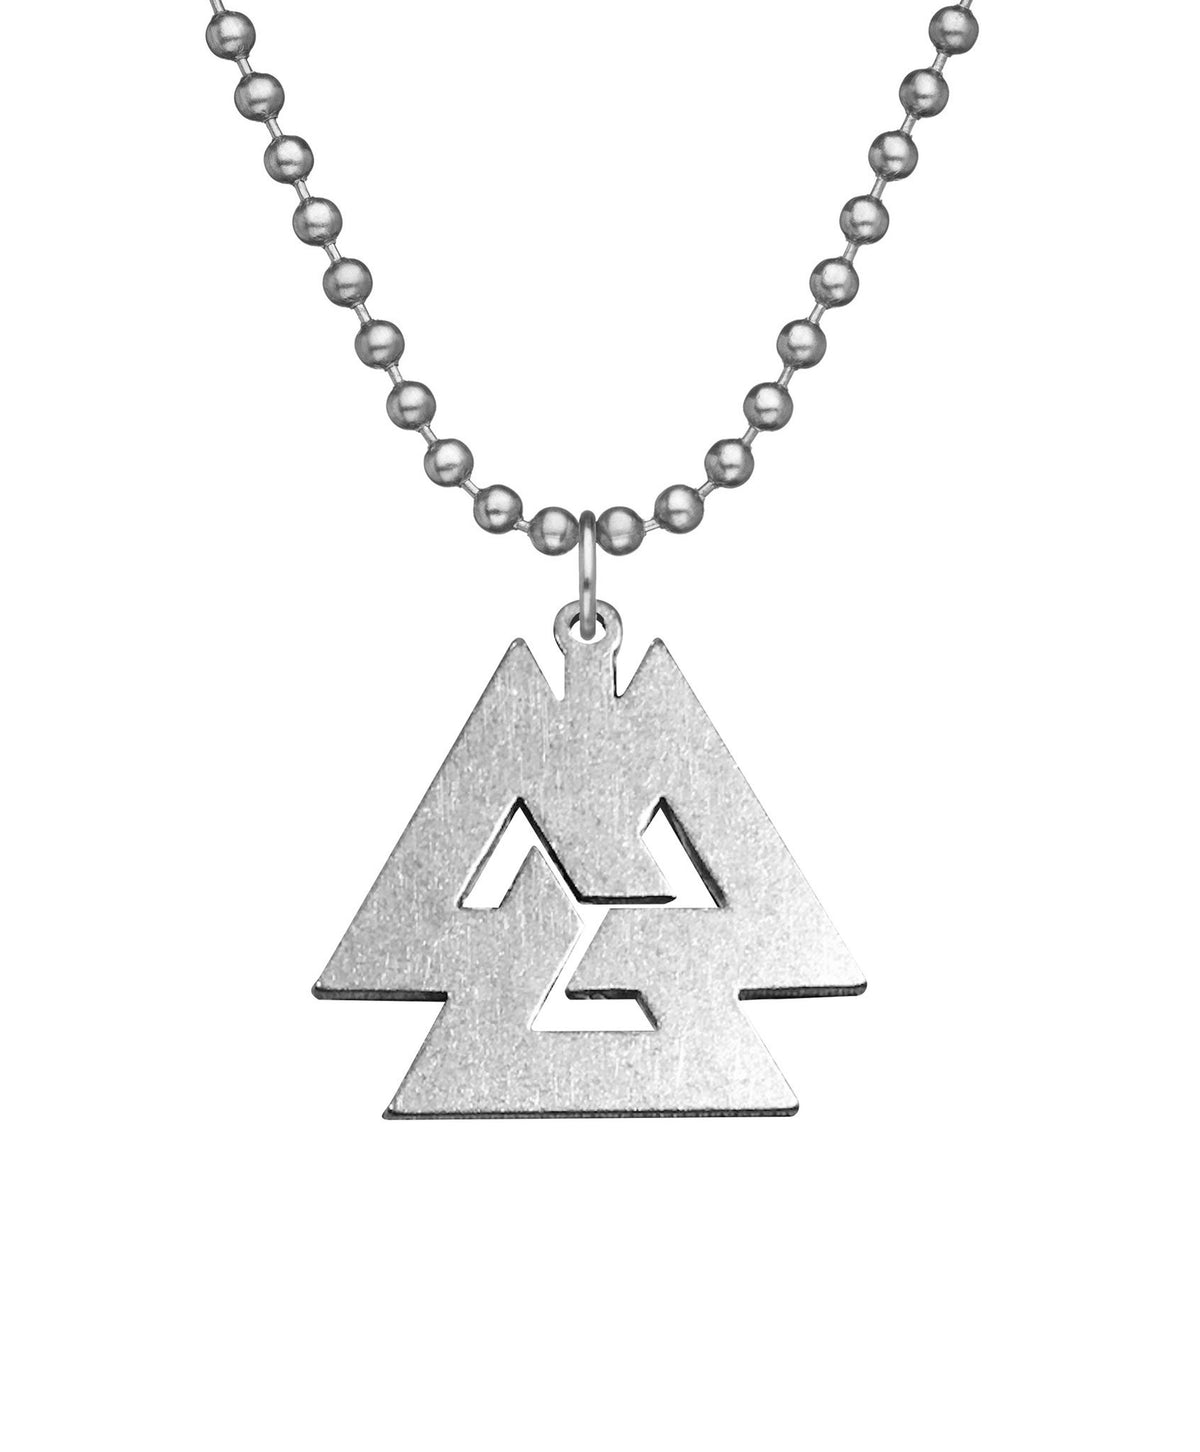 Genuine U.S. Military Issue Asatru Necklace with Dog Tag Chain - CLEARANCE!